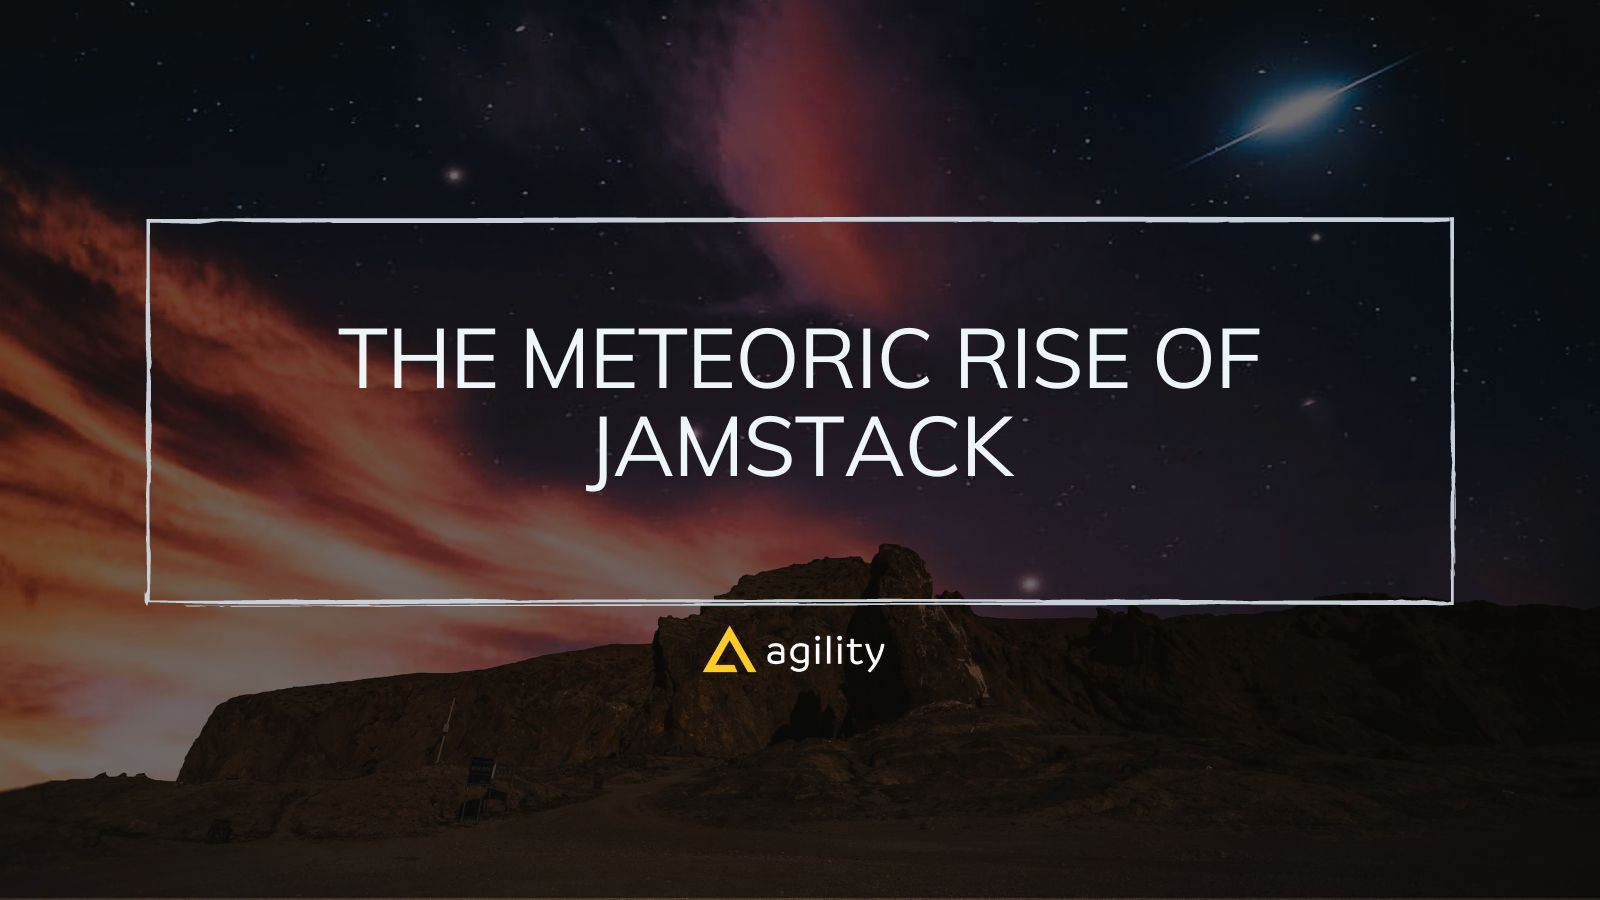 The Meteoric Rise of Jamstack